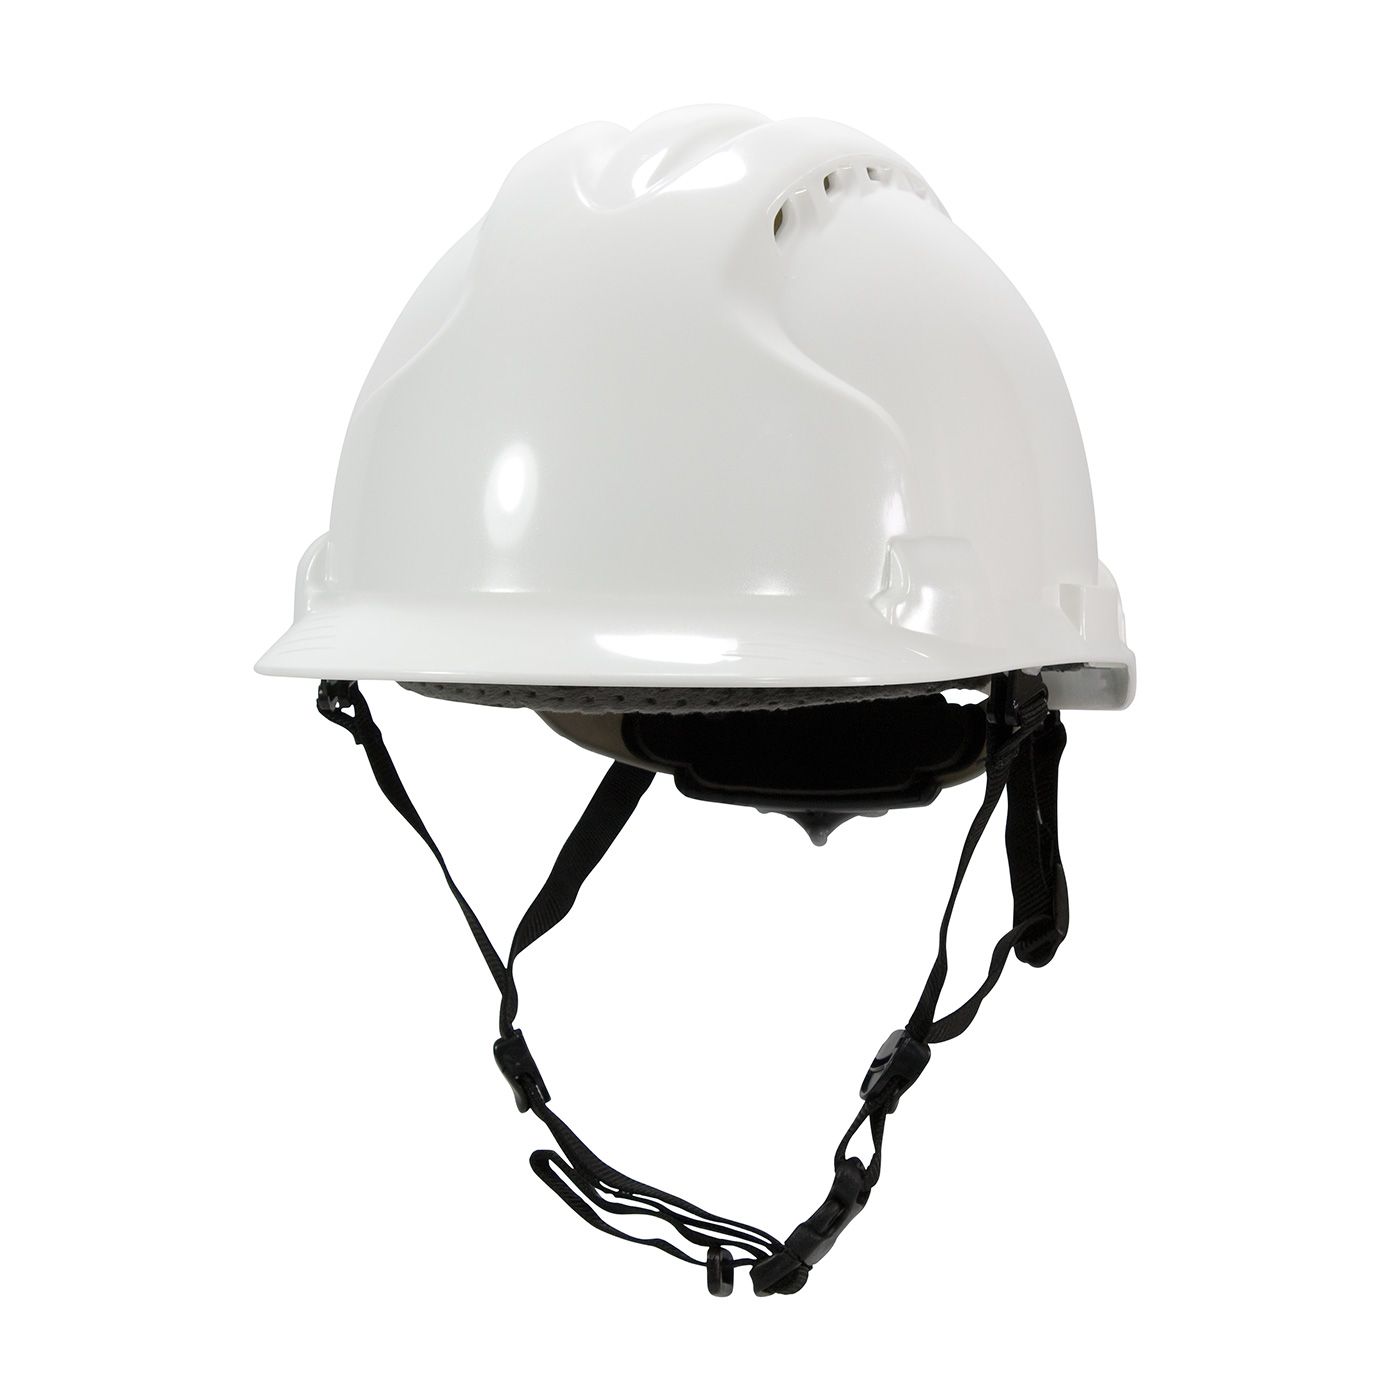 PIP® MK8 Evolution® 280-AHS240V-10 Vented, Type II Linesman Hard Hat with HDPE Shell, EPS Impact Liner, Polyester Suspension, Wheel Ratchet Adjustment and 4-Point Chin Strap, White